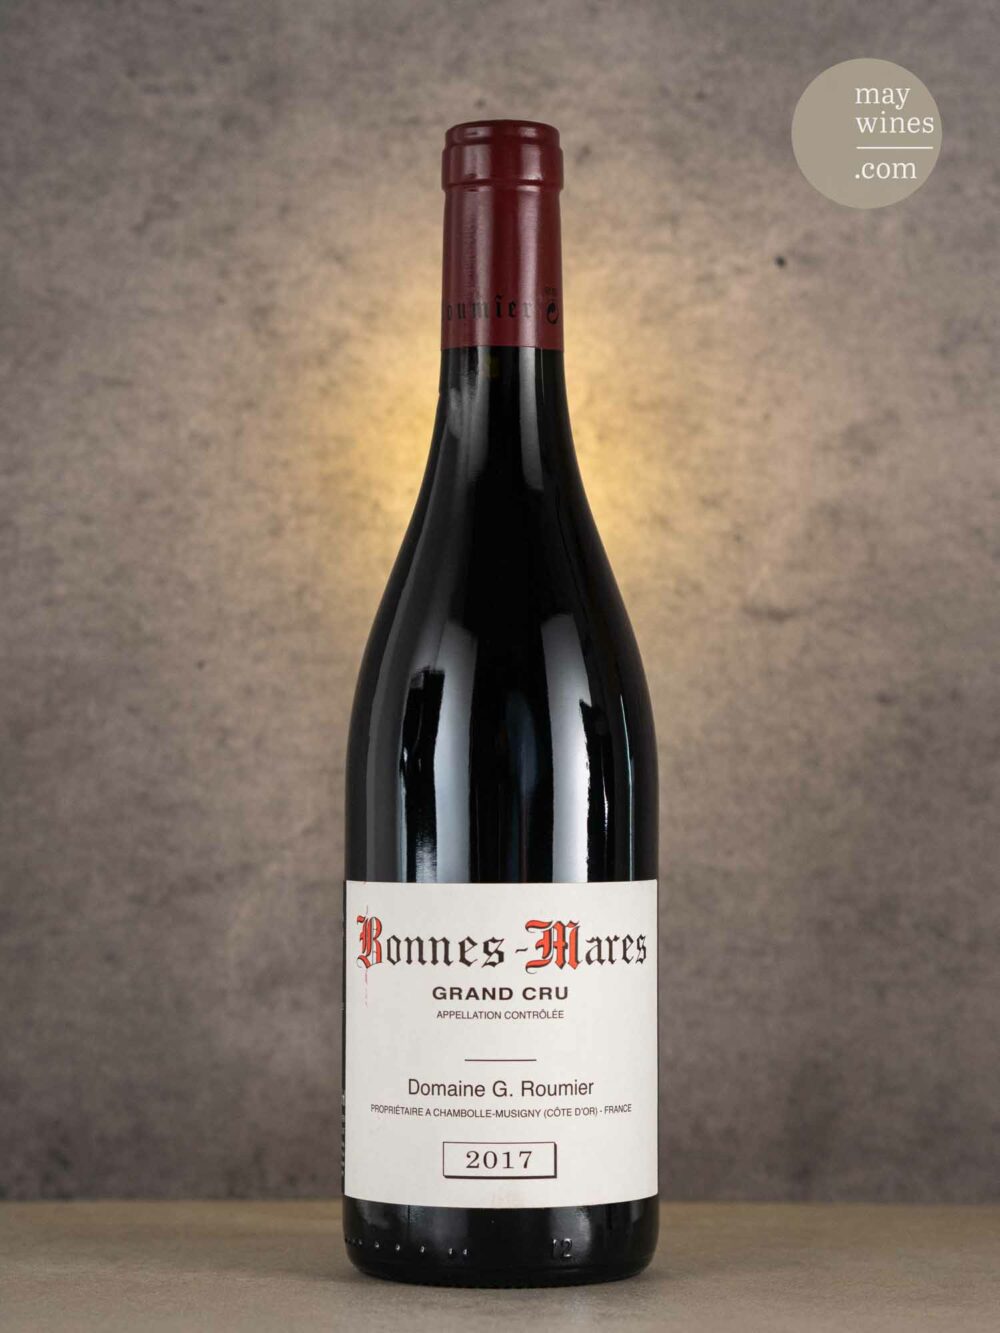 May Wines – Rotwein – 2017 Bonnes Mares Grand Cru - Domaine G. Roumier